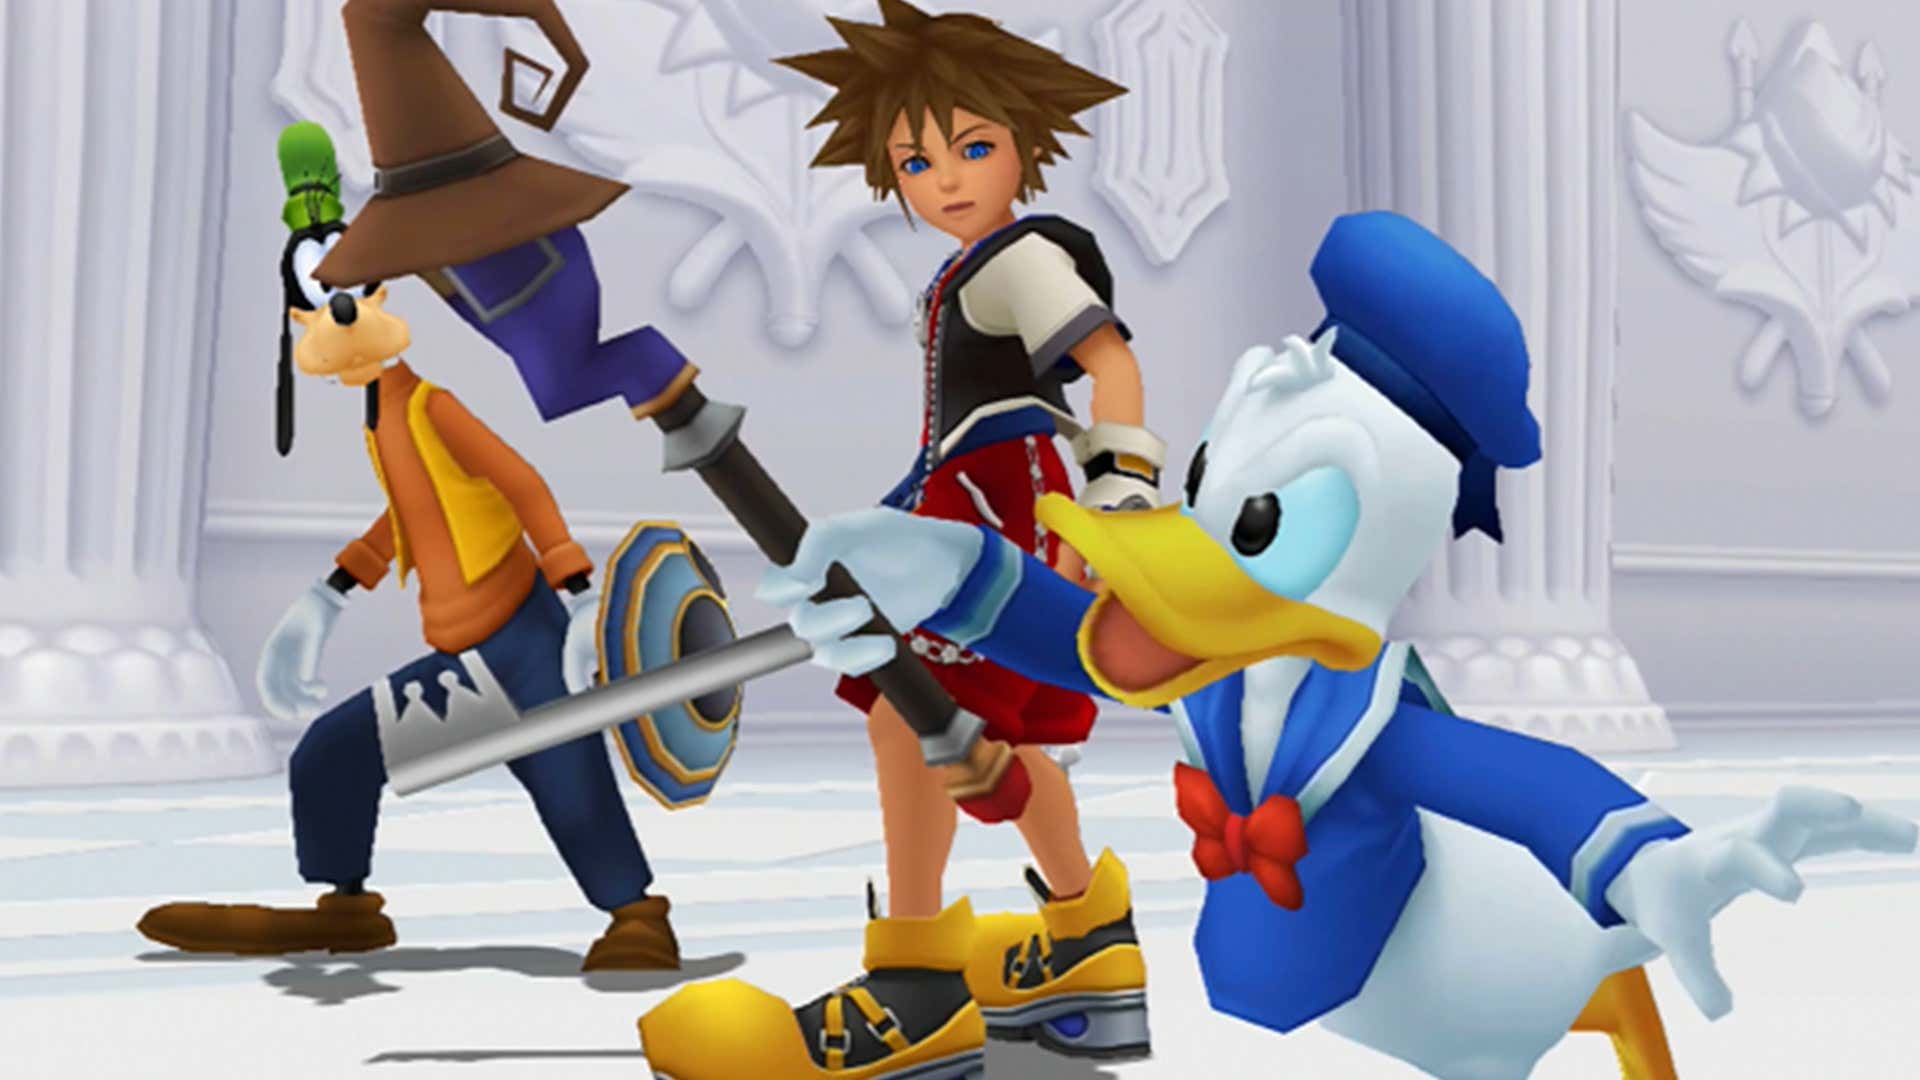 Goofy, Sora and Donald Duck stand together in a bright white room. 